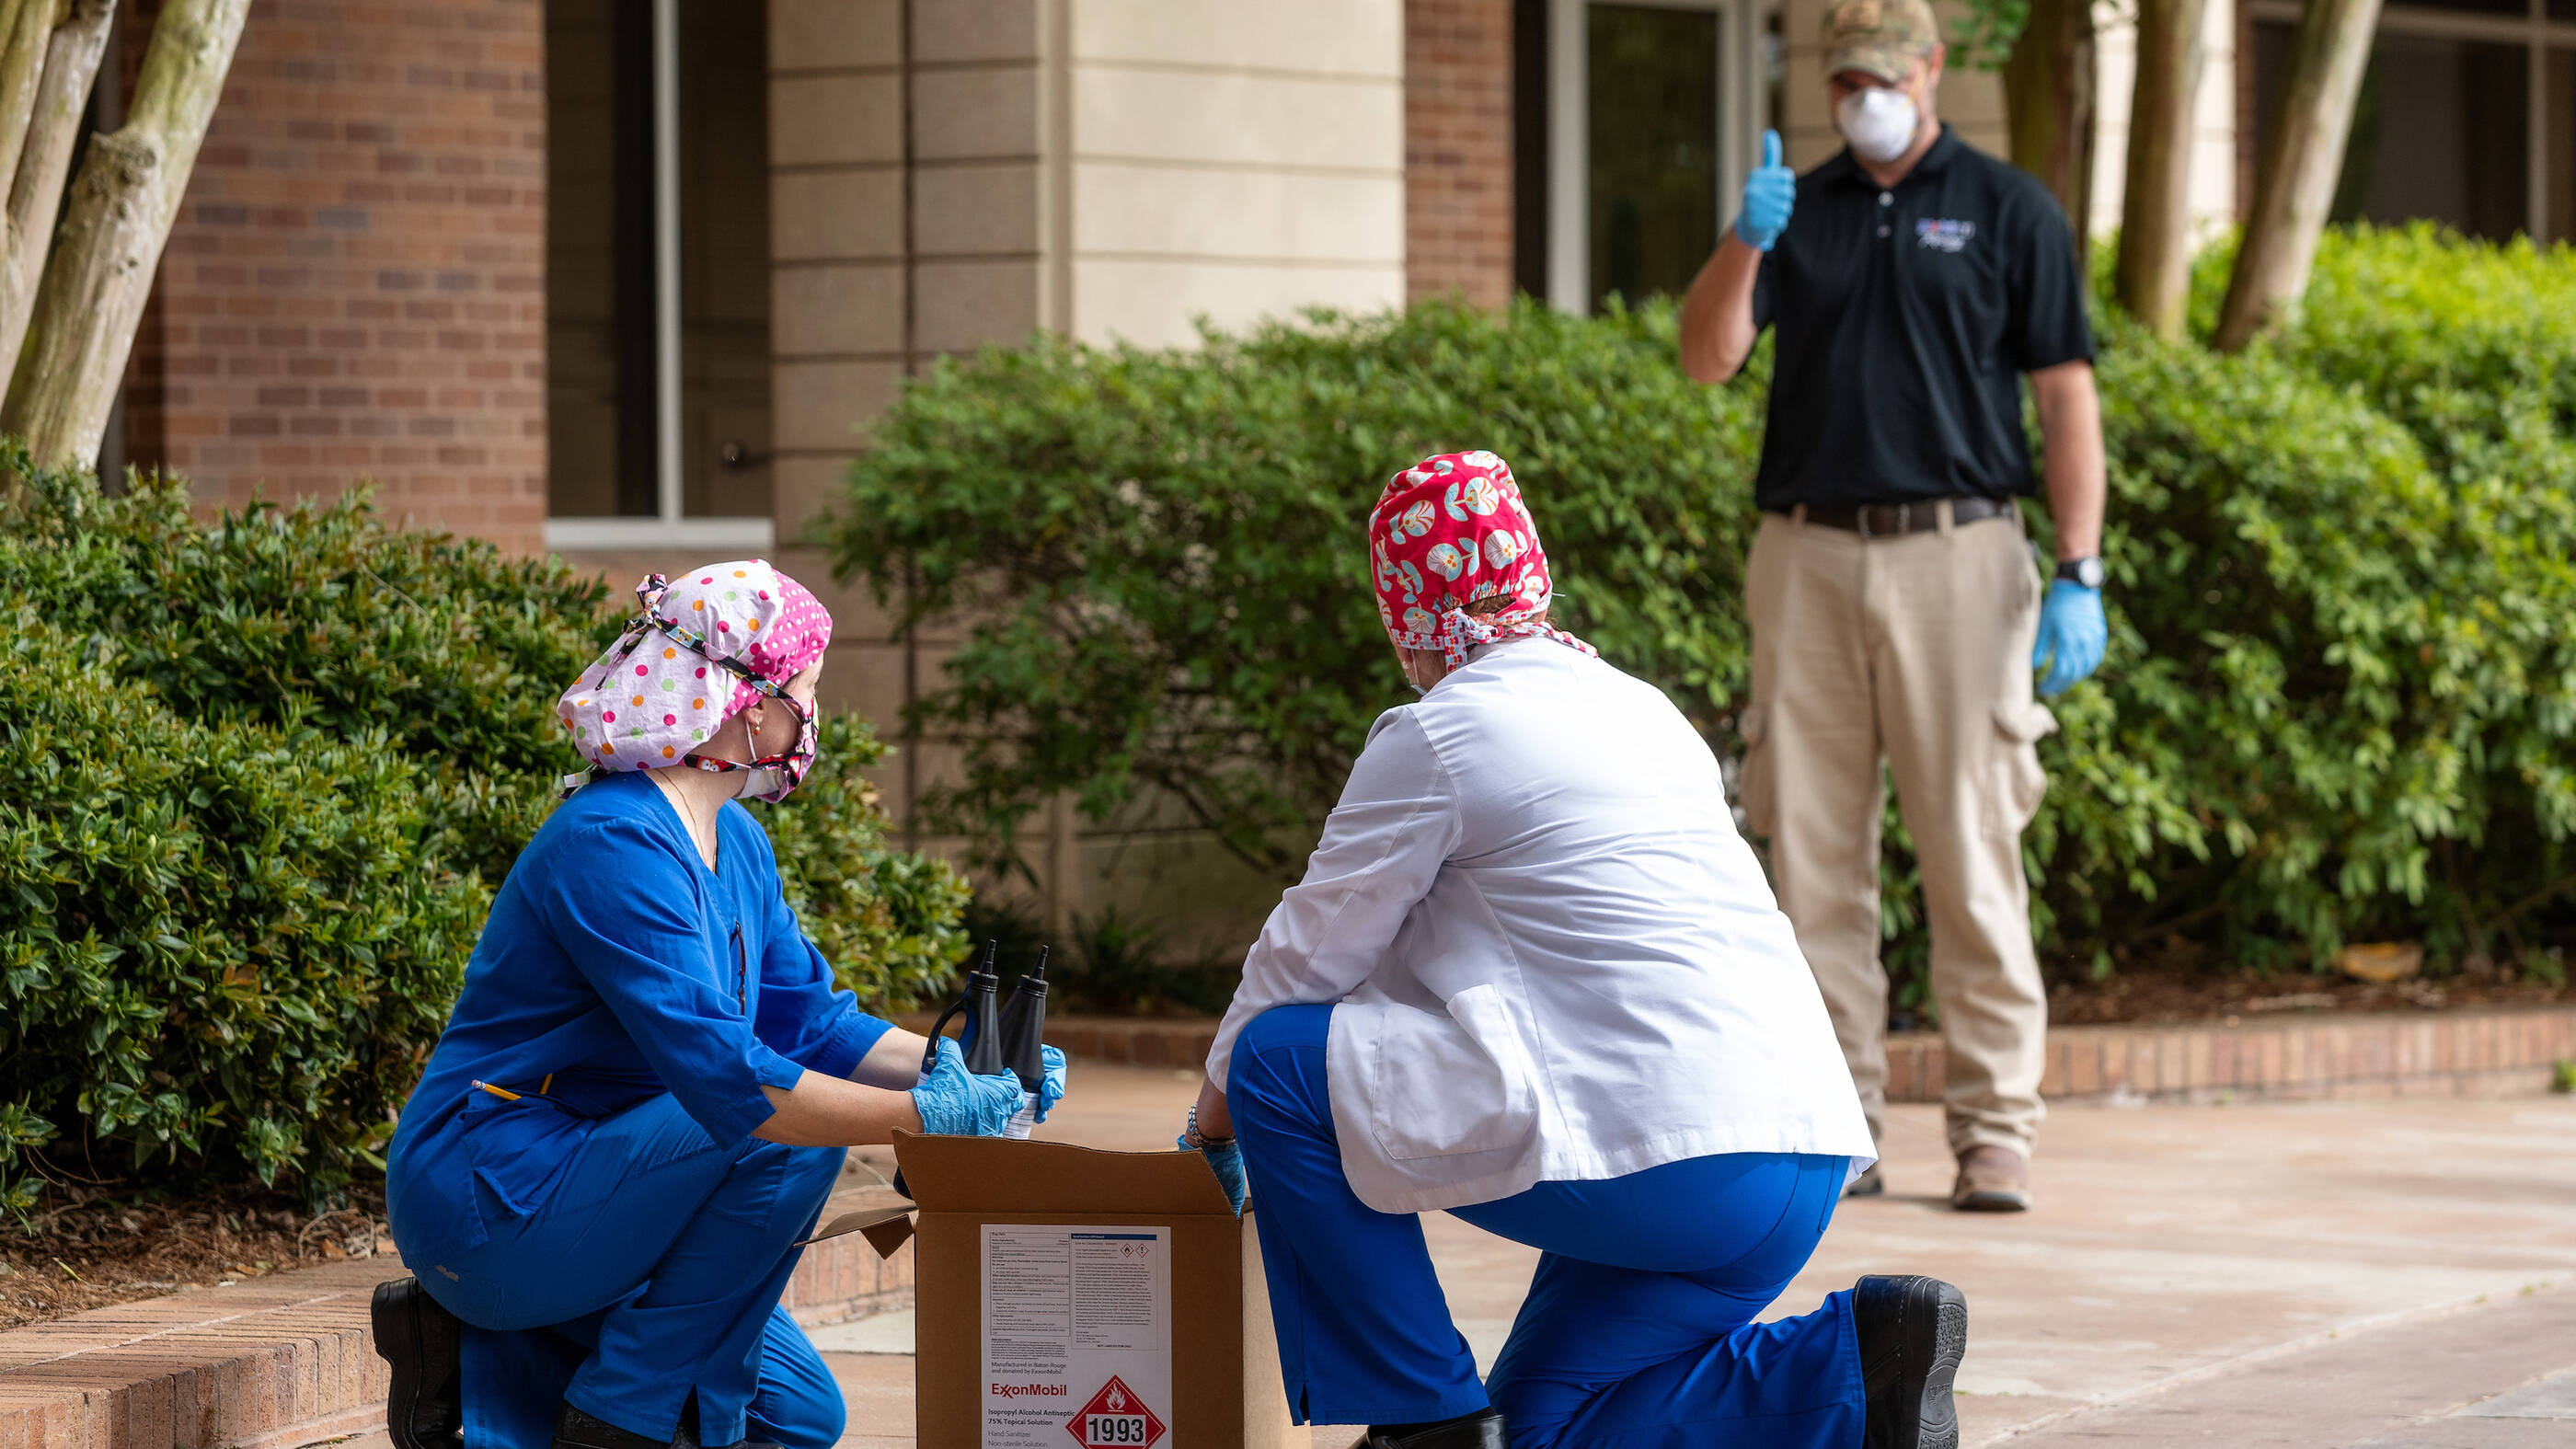 ExxonMobil employees at facilities across the country have shifted their workdays to deliver sanitizers to the front lines. Ryan Beissinger maintains social distancing during a delivery at Baton Rouge General Hospital.